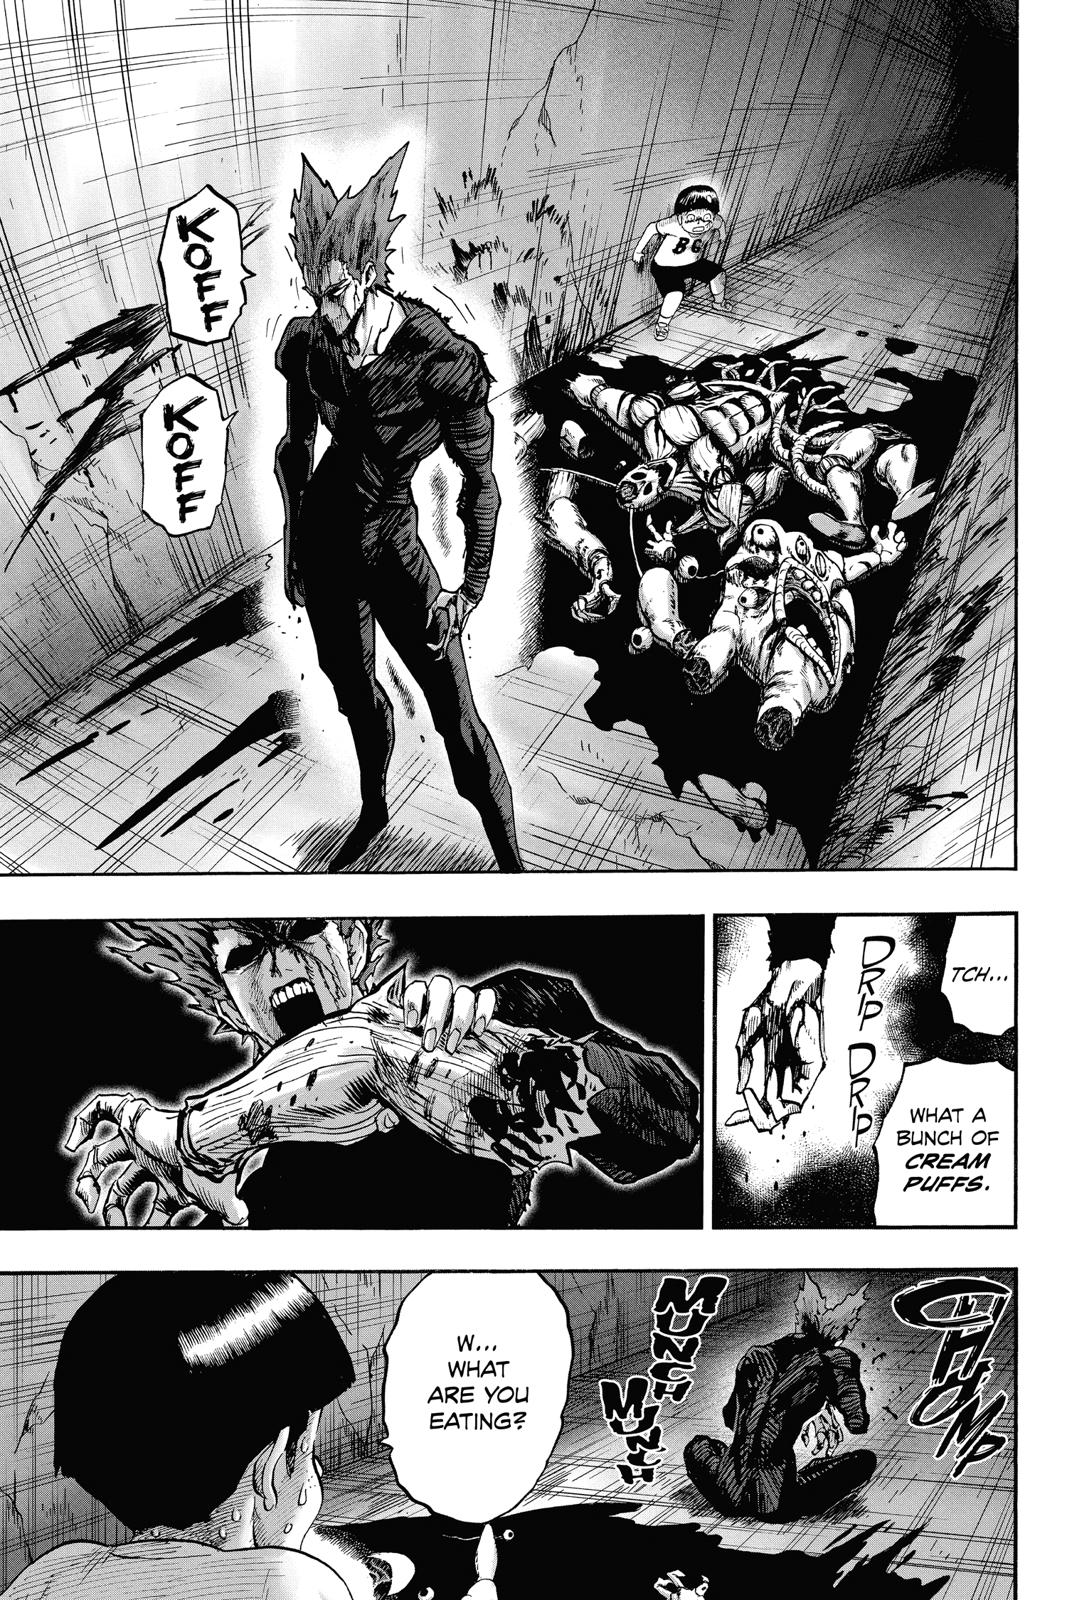 One-Punch Man, Punch 92 image 42